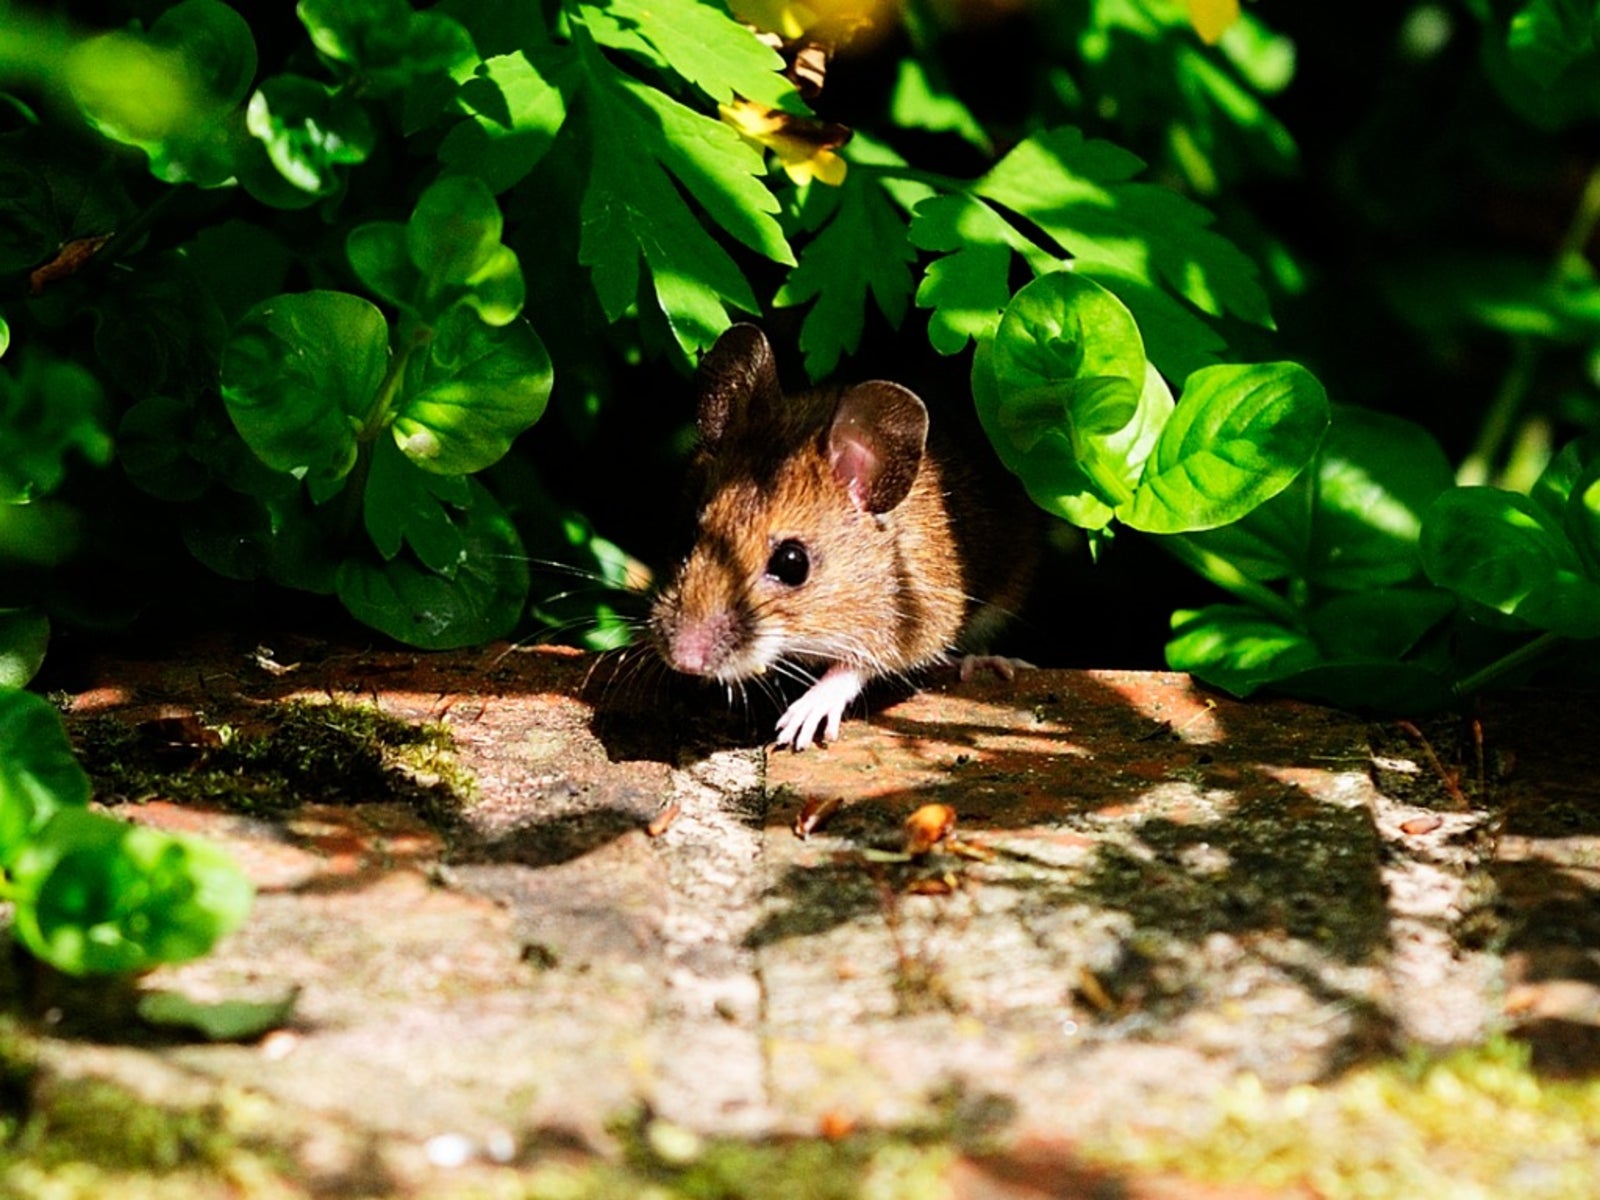 Garden Mouse Control: How To Get Rid Of Mice In The Garden